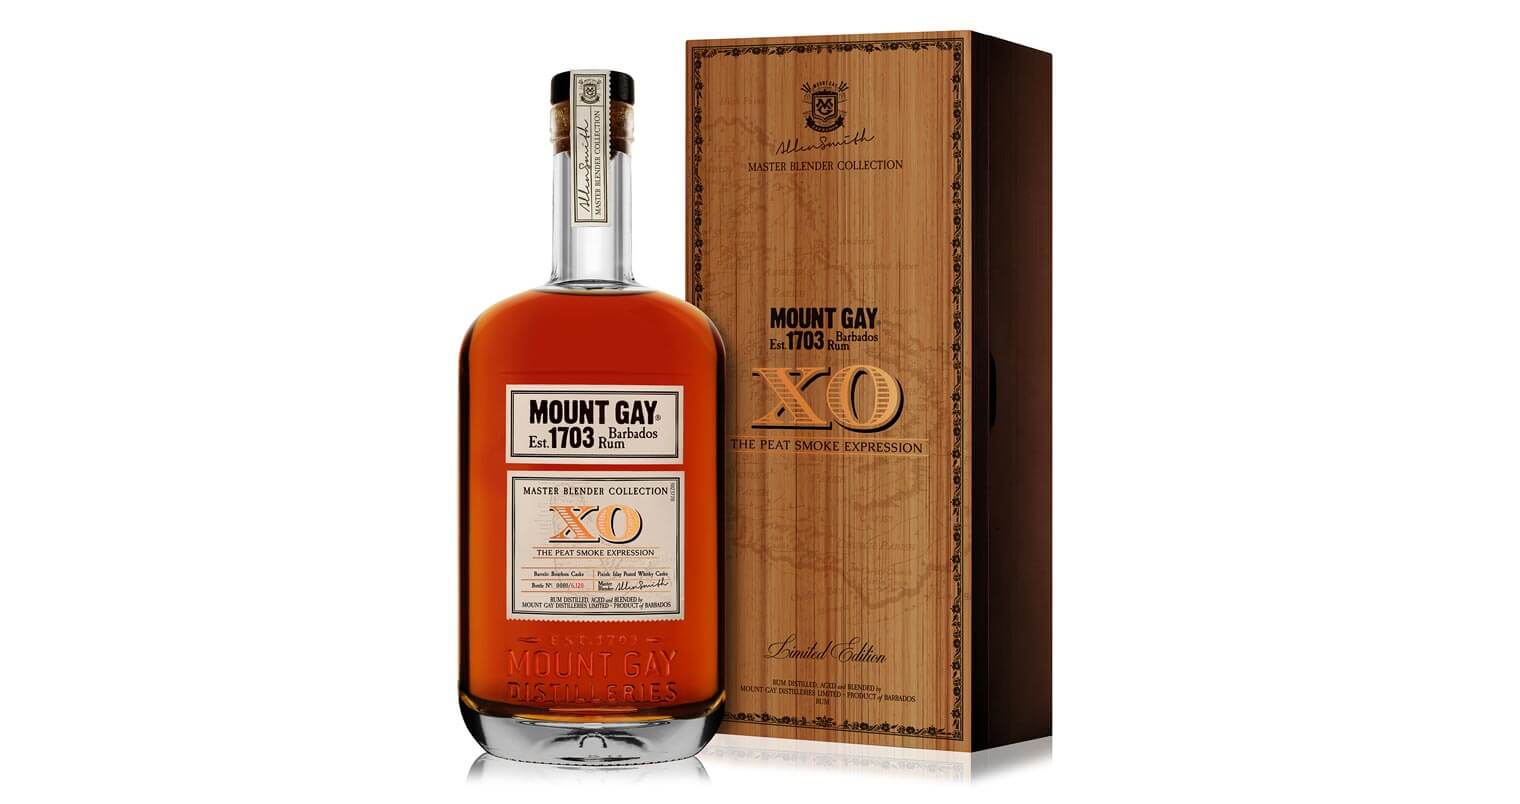 Mount Gay Releases Limited Edition XO The Peat Smoke Expression, bottle and package on white